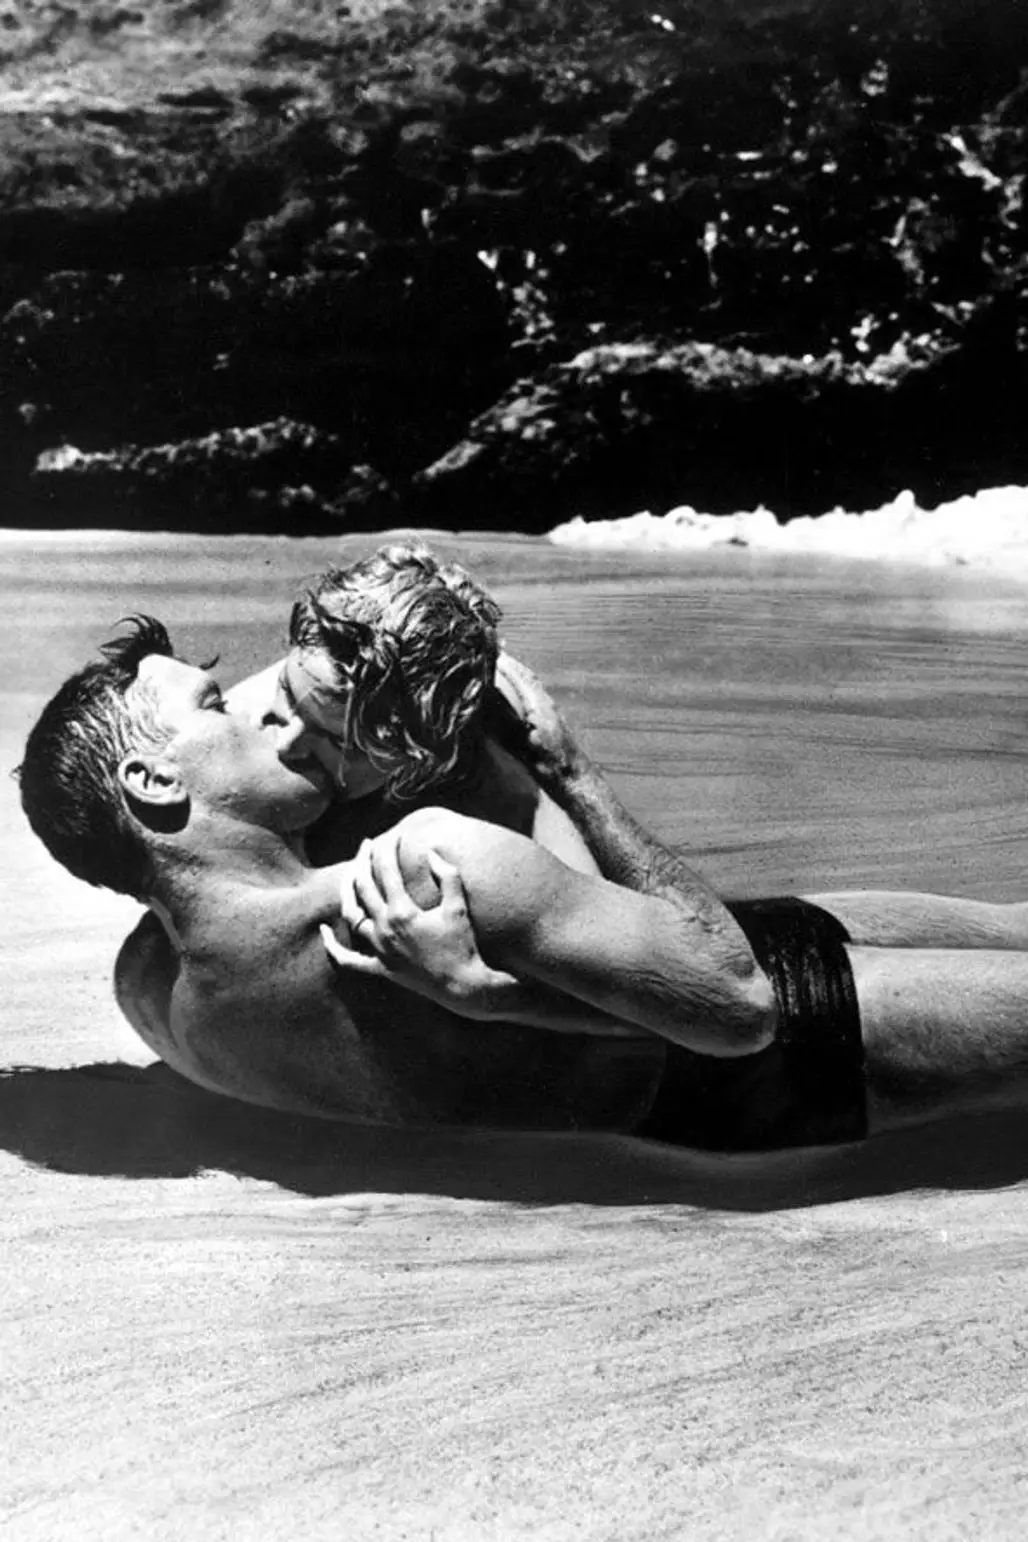 Milton and Karen, "from Here to Eternity"